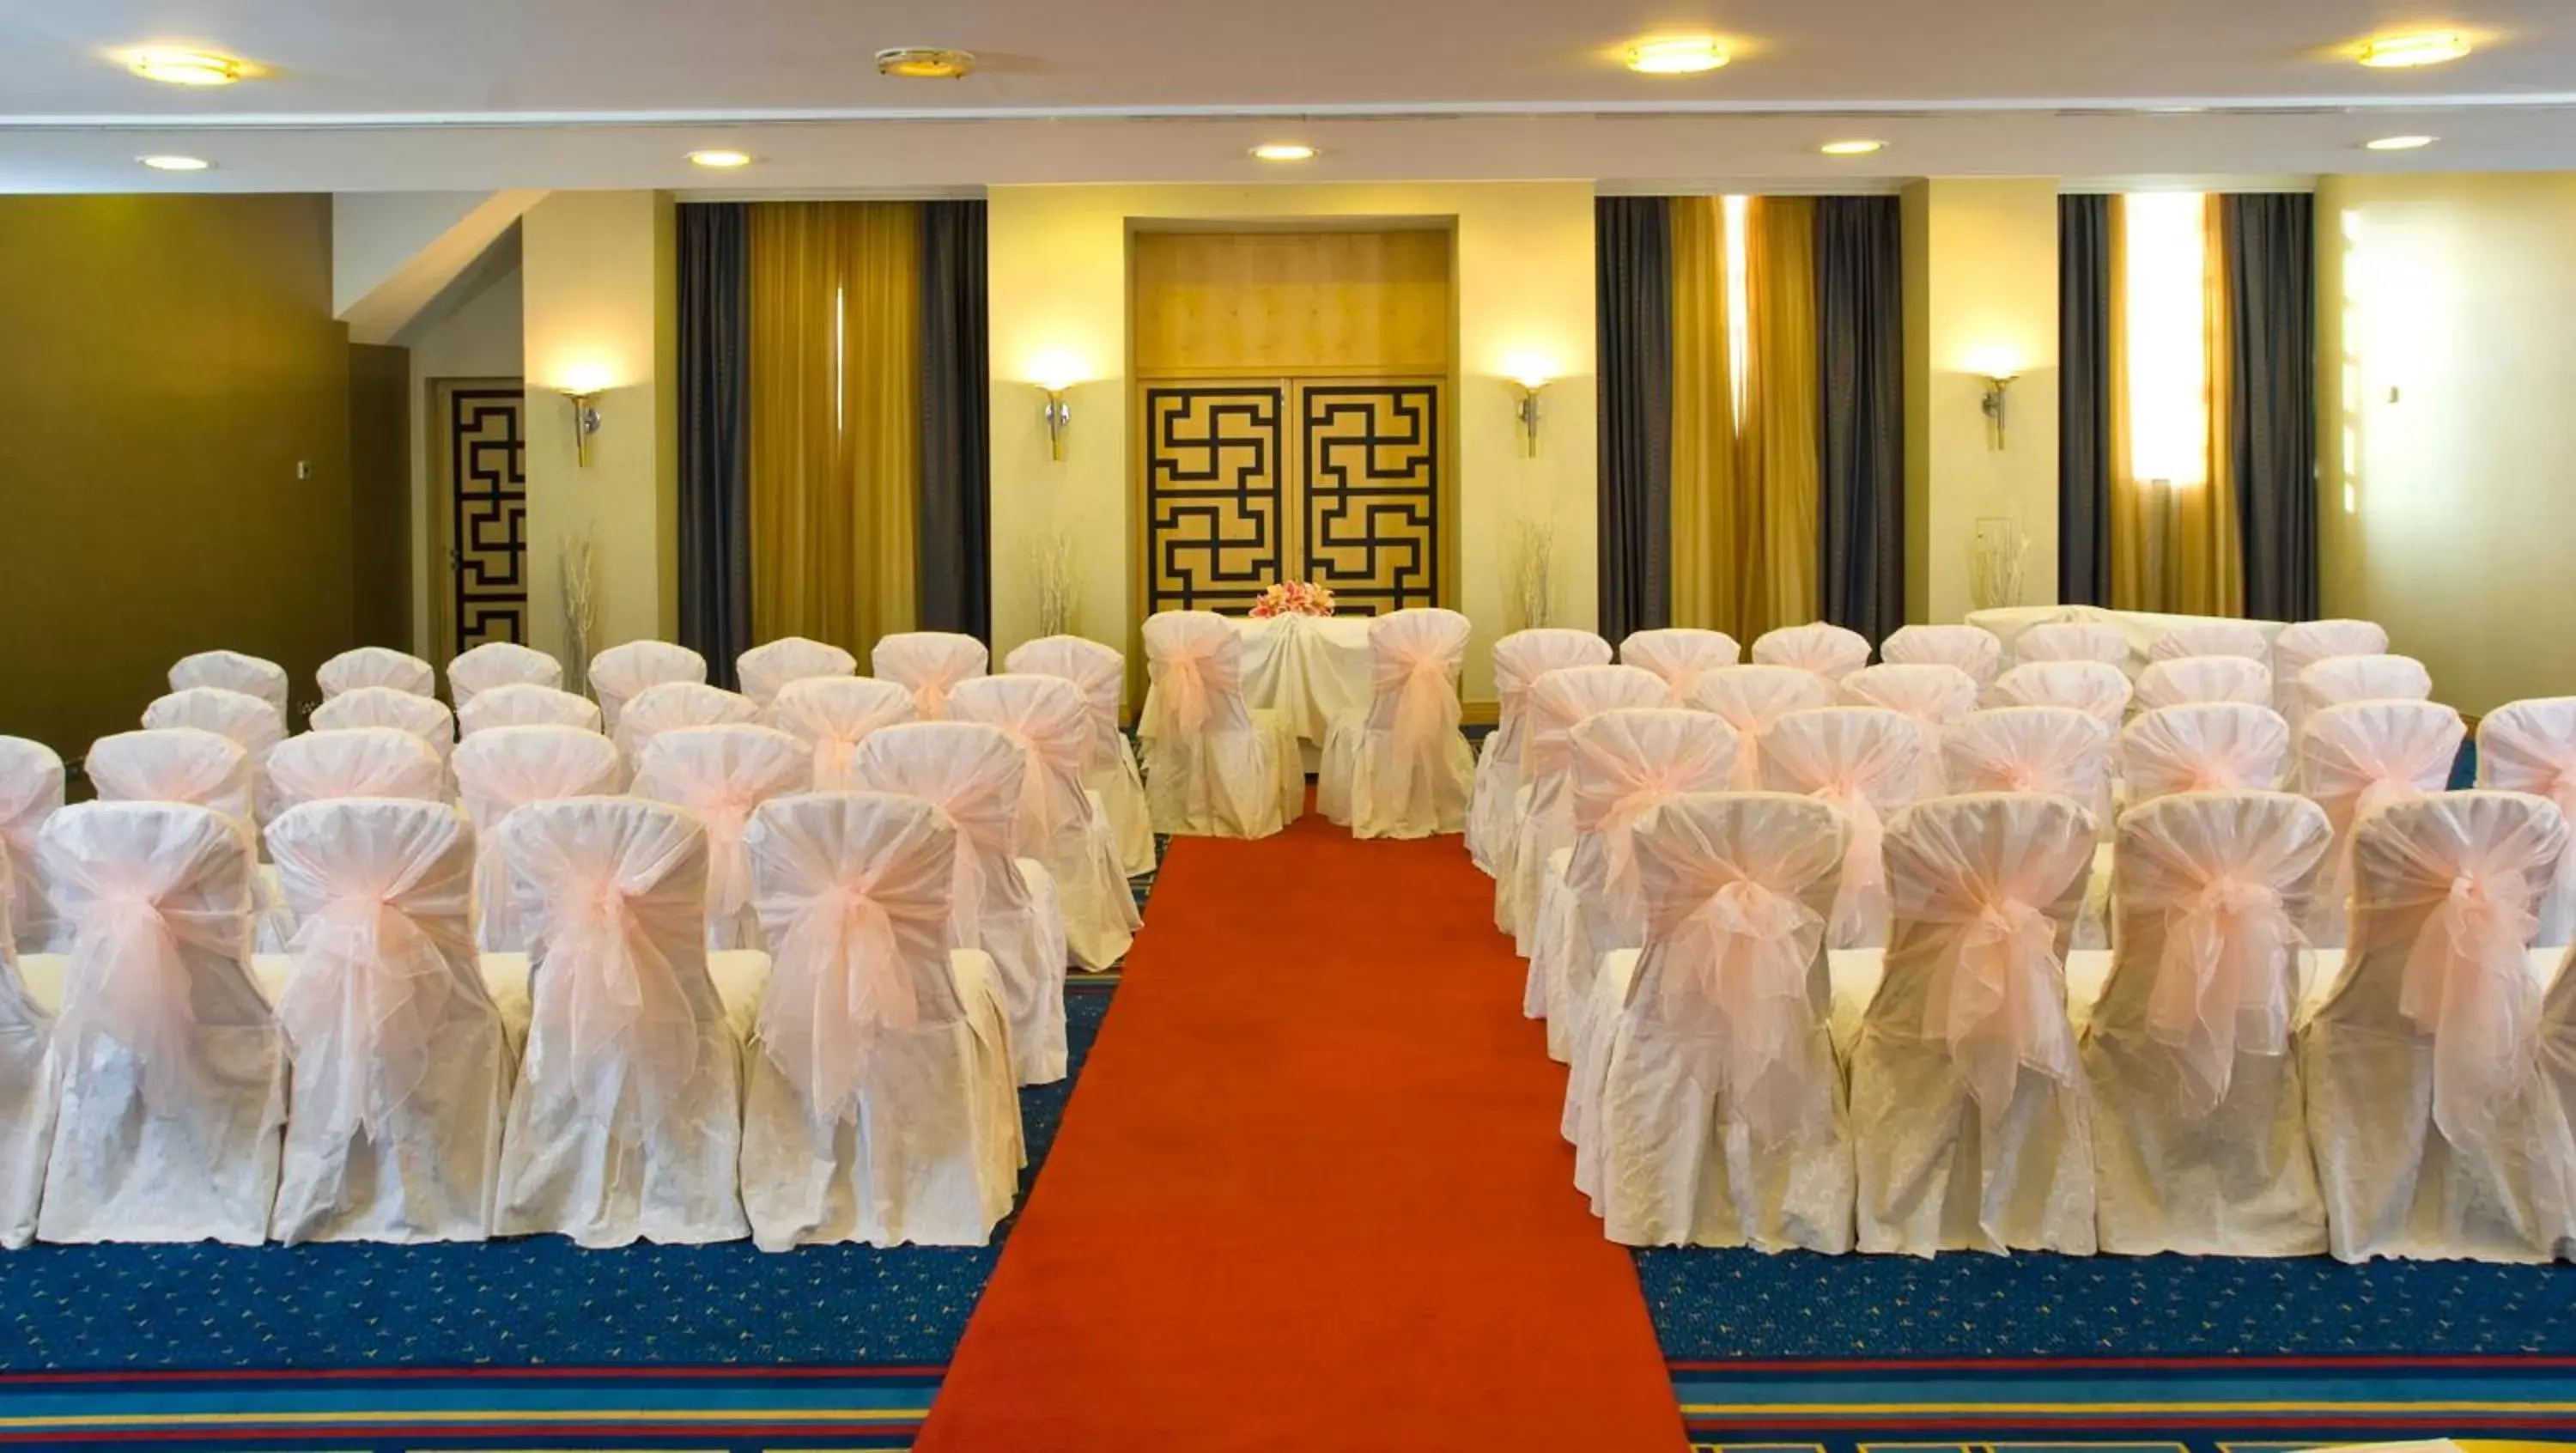 Meeting/conference room, Banquet Facilities in Crowne Plaza Liverpool - John Lennon Airport, an IHG Hotel